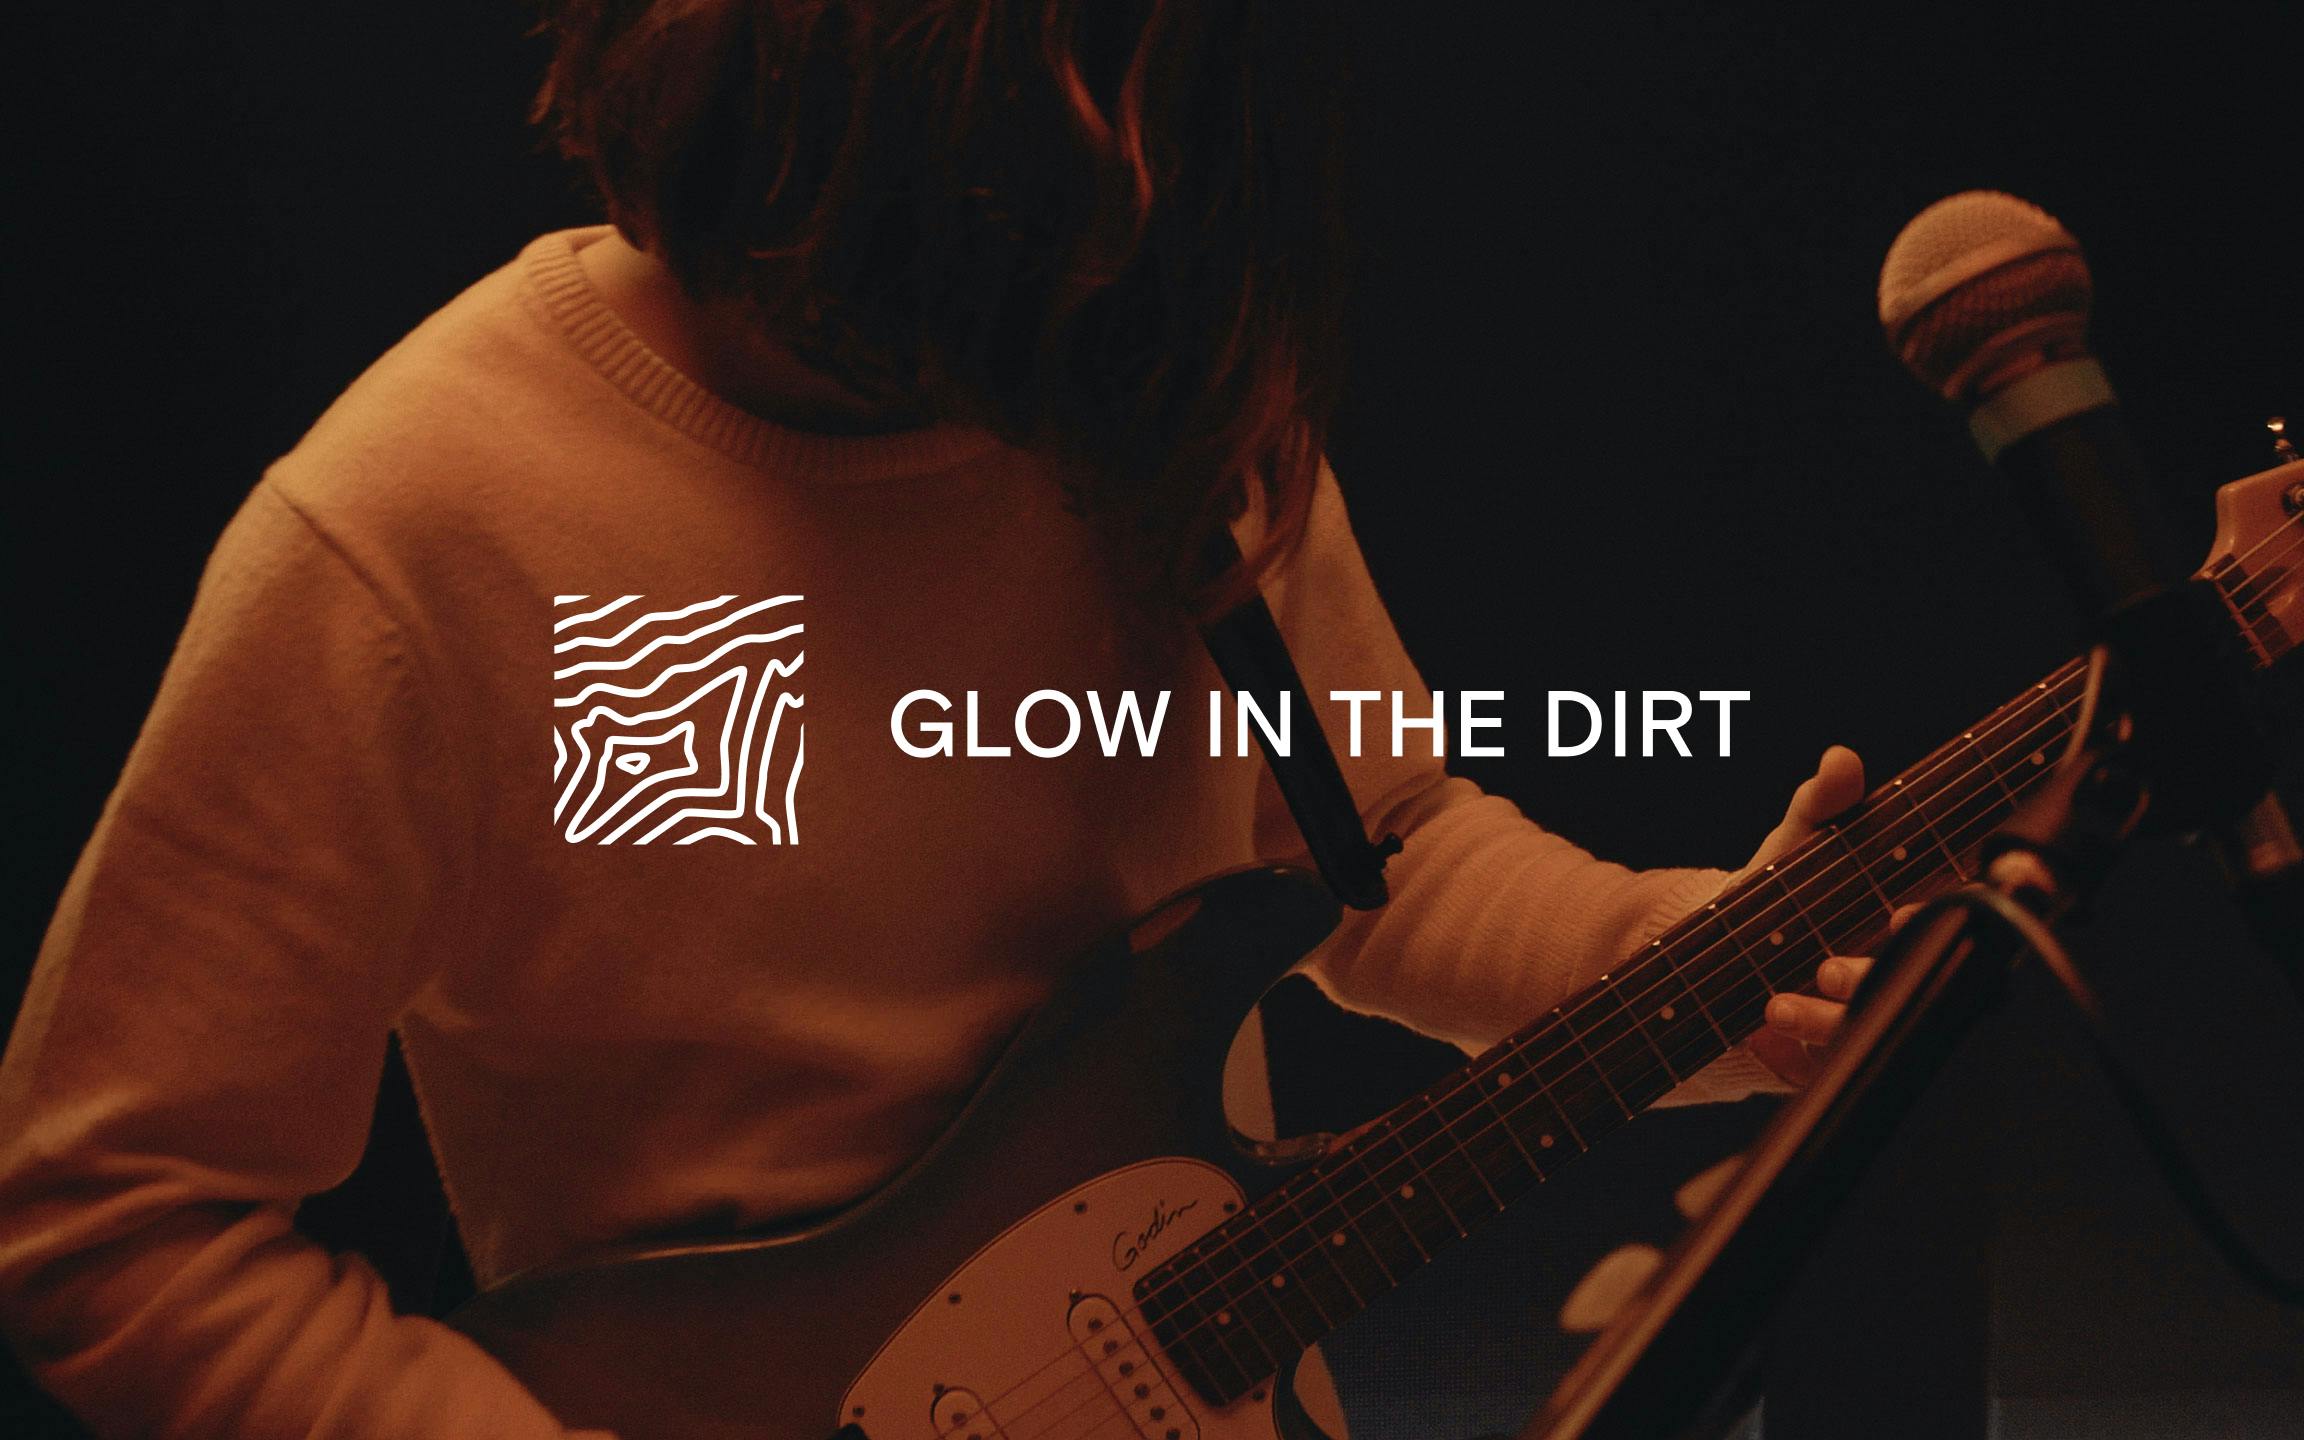 A photo of a man playing guitaer with the glow in the dirt logo on top